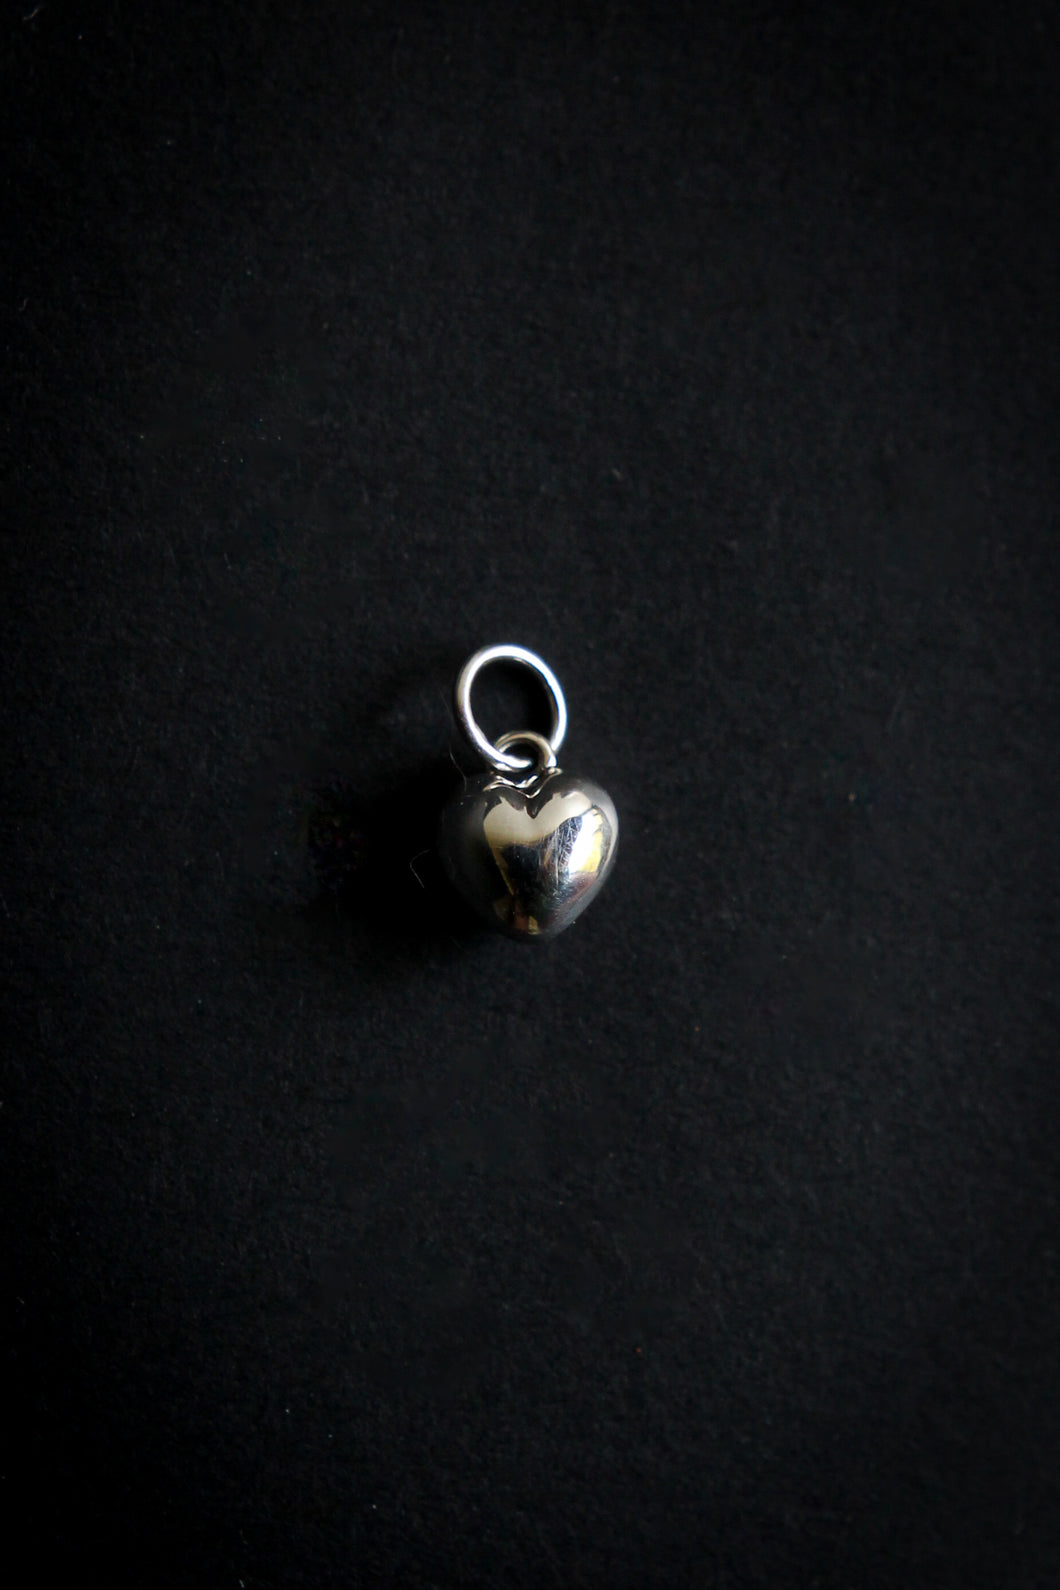 Sterling Silver Puffy Heart Charm